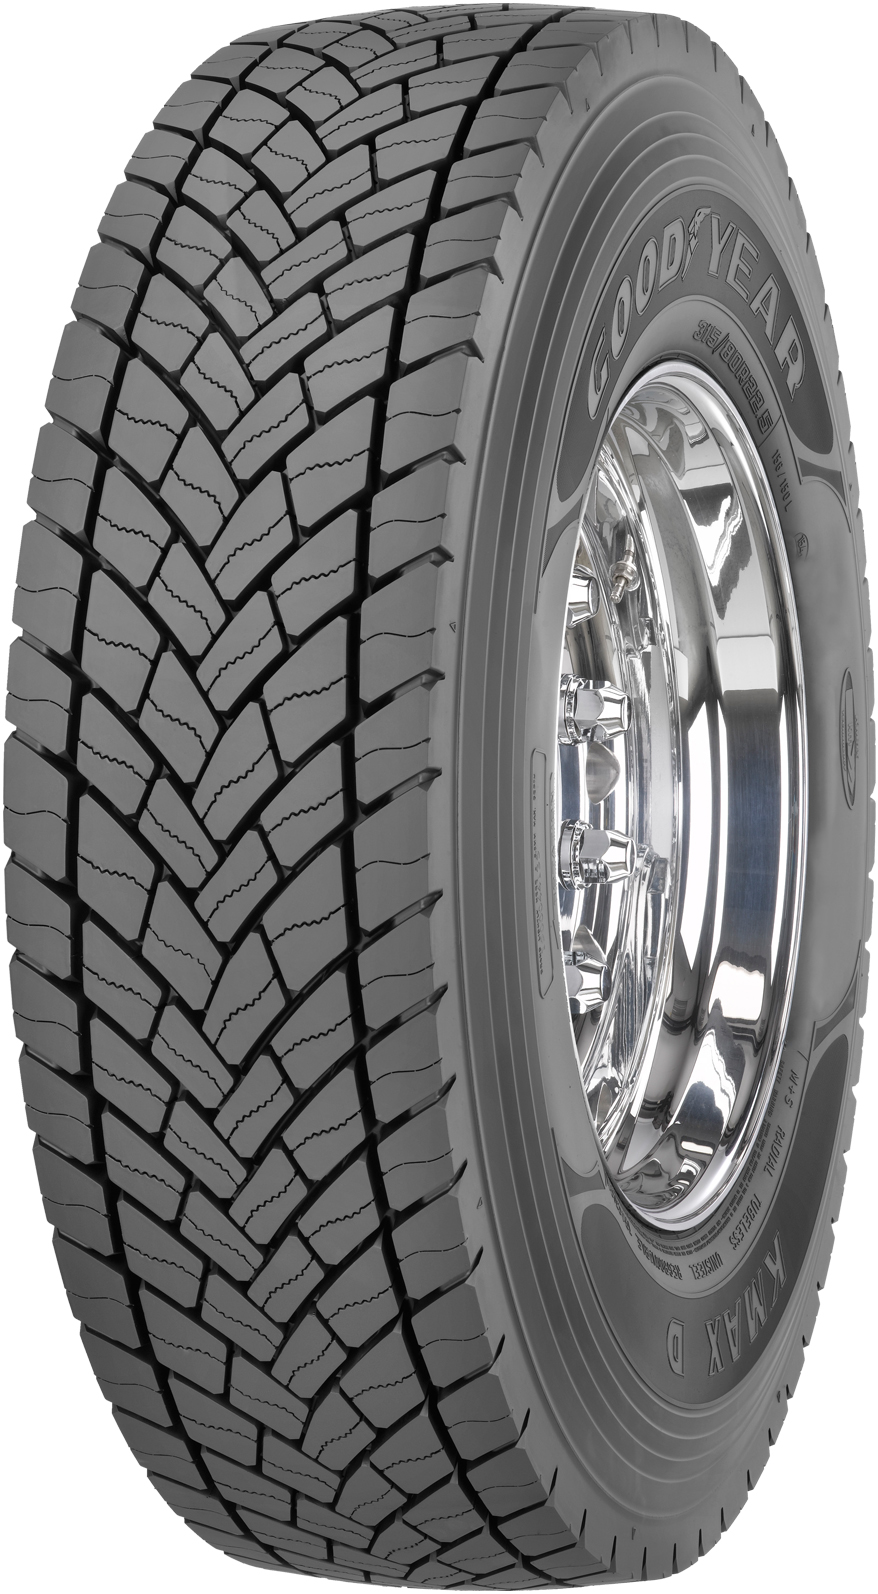 product_type-heavy_tires GOODYEAR KMAX D 12 TL 205/75 R17.5 126G